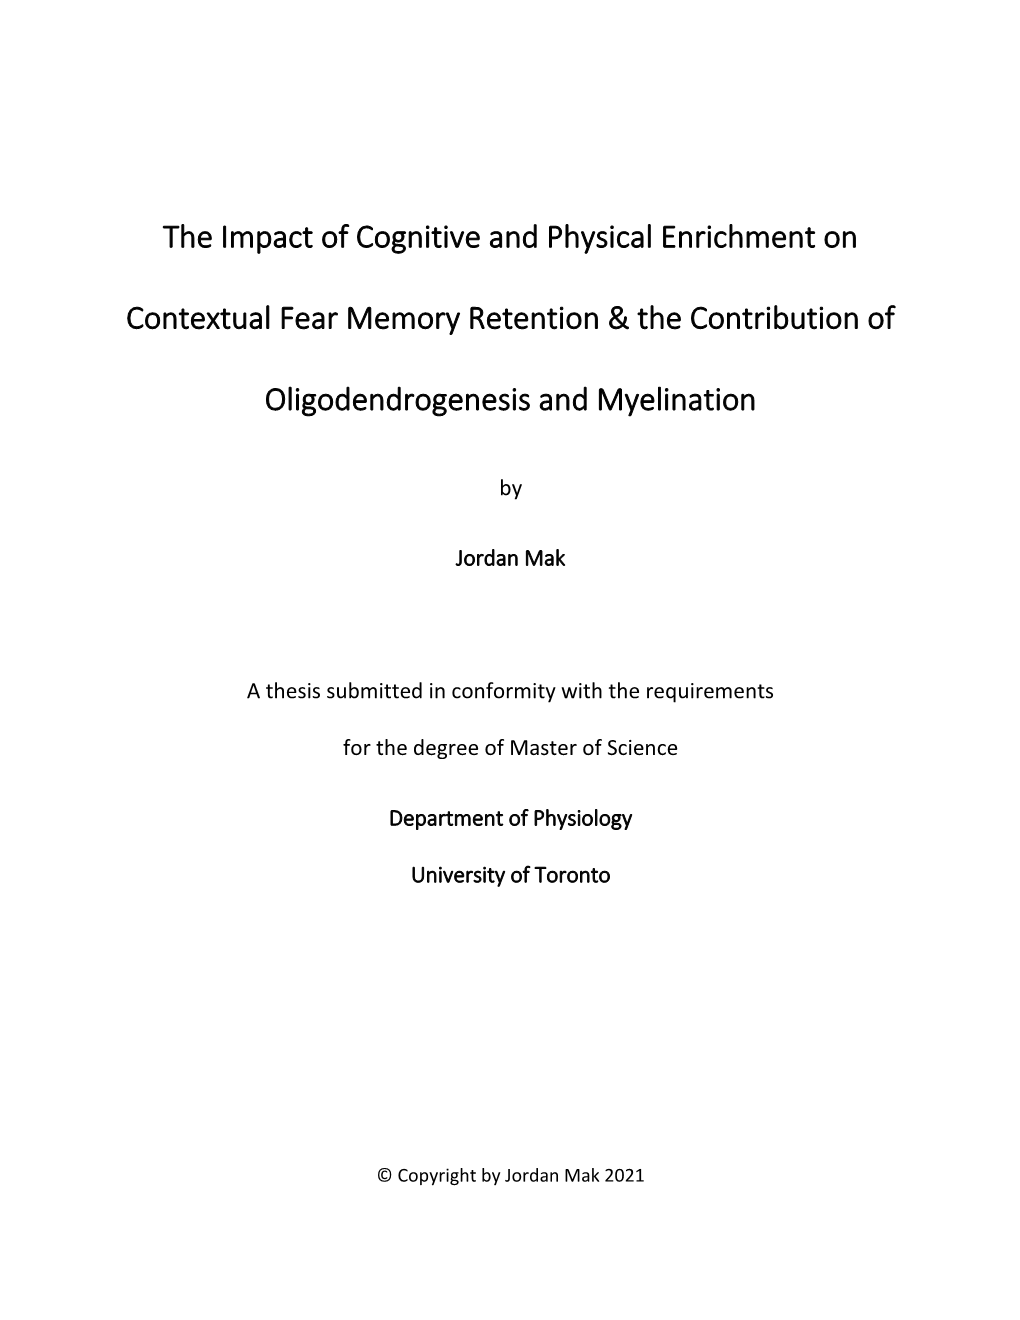 The Impact of Cognitive and Physical Enrichment on Contextual Fear Memory Retention